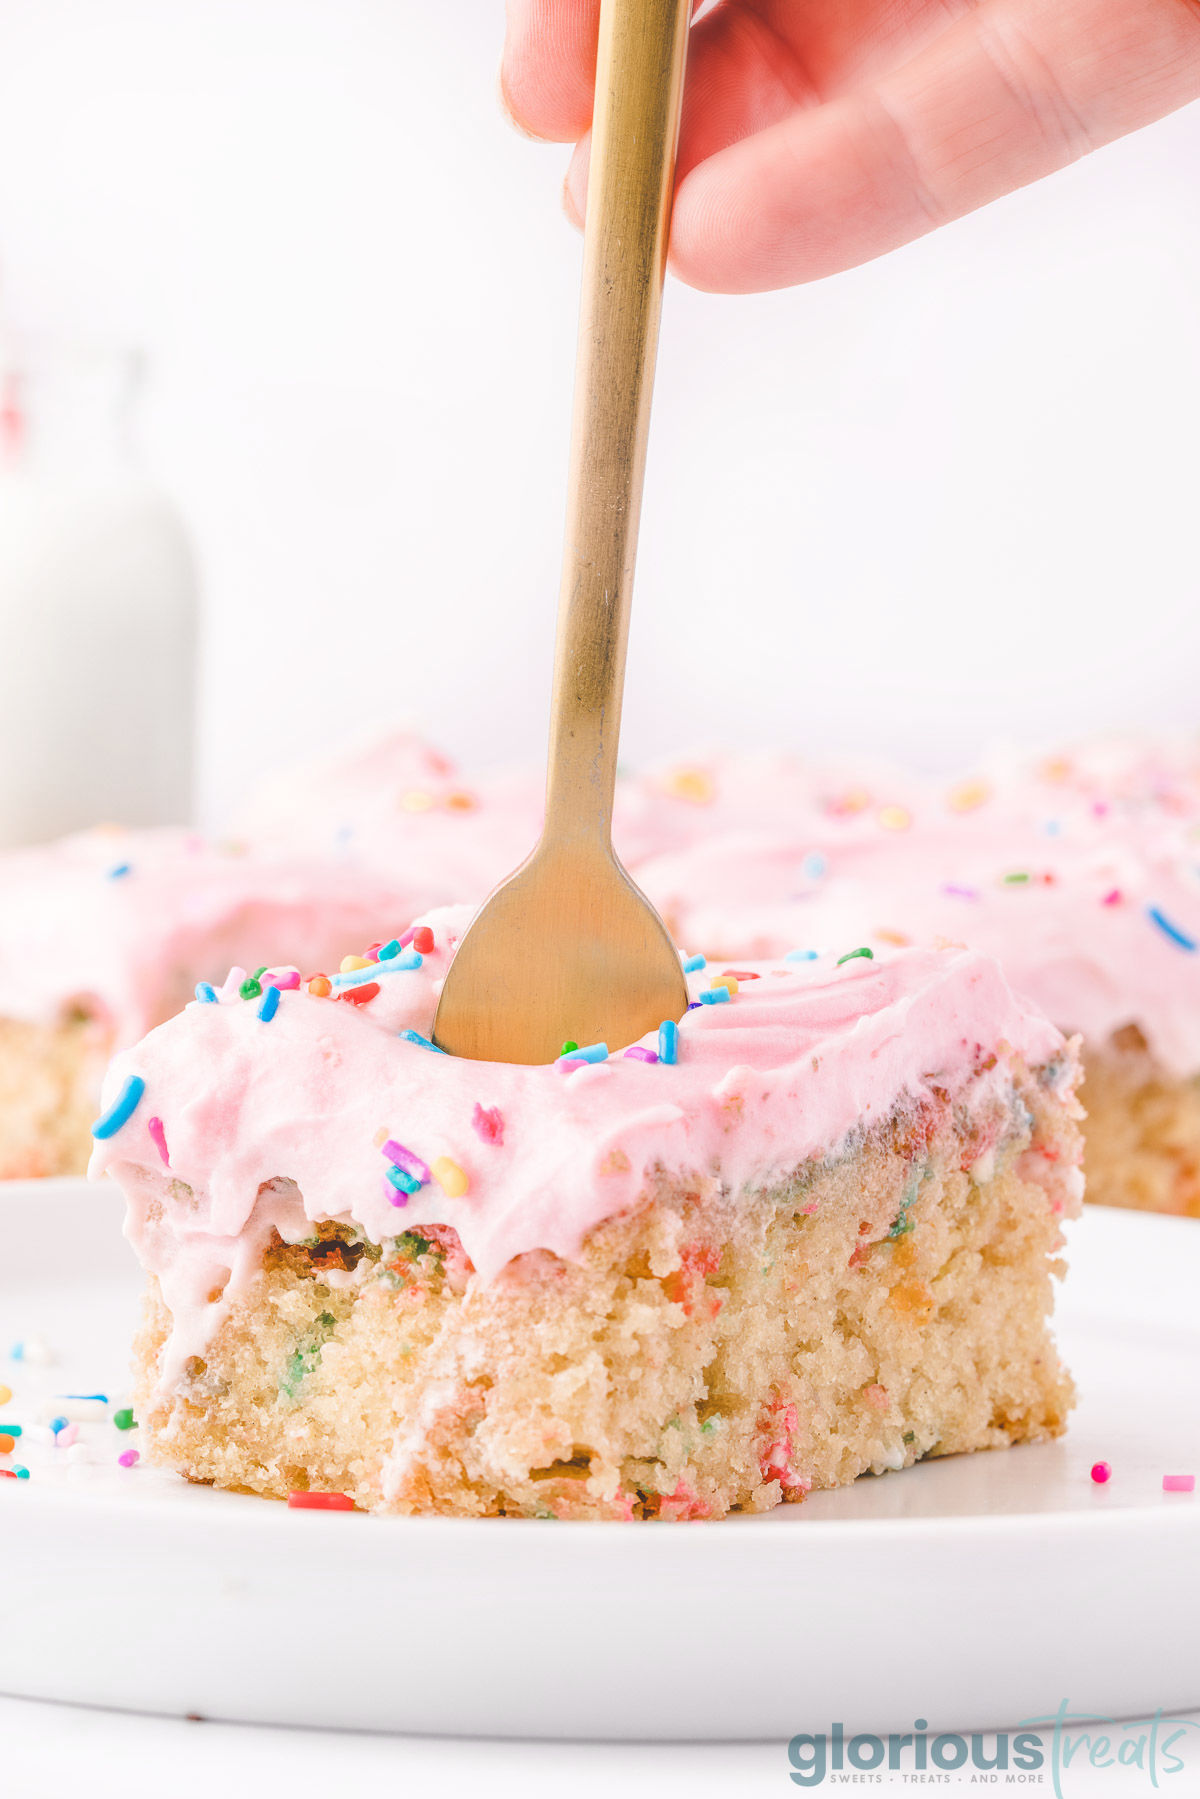 a hand holding a gold fork in a slice of funfetti sheet cake on a white plate.